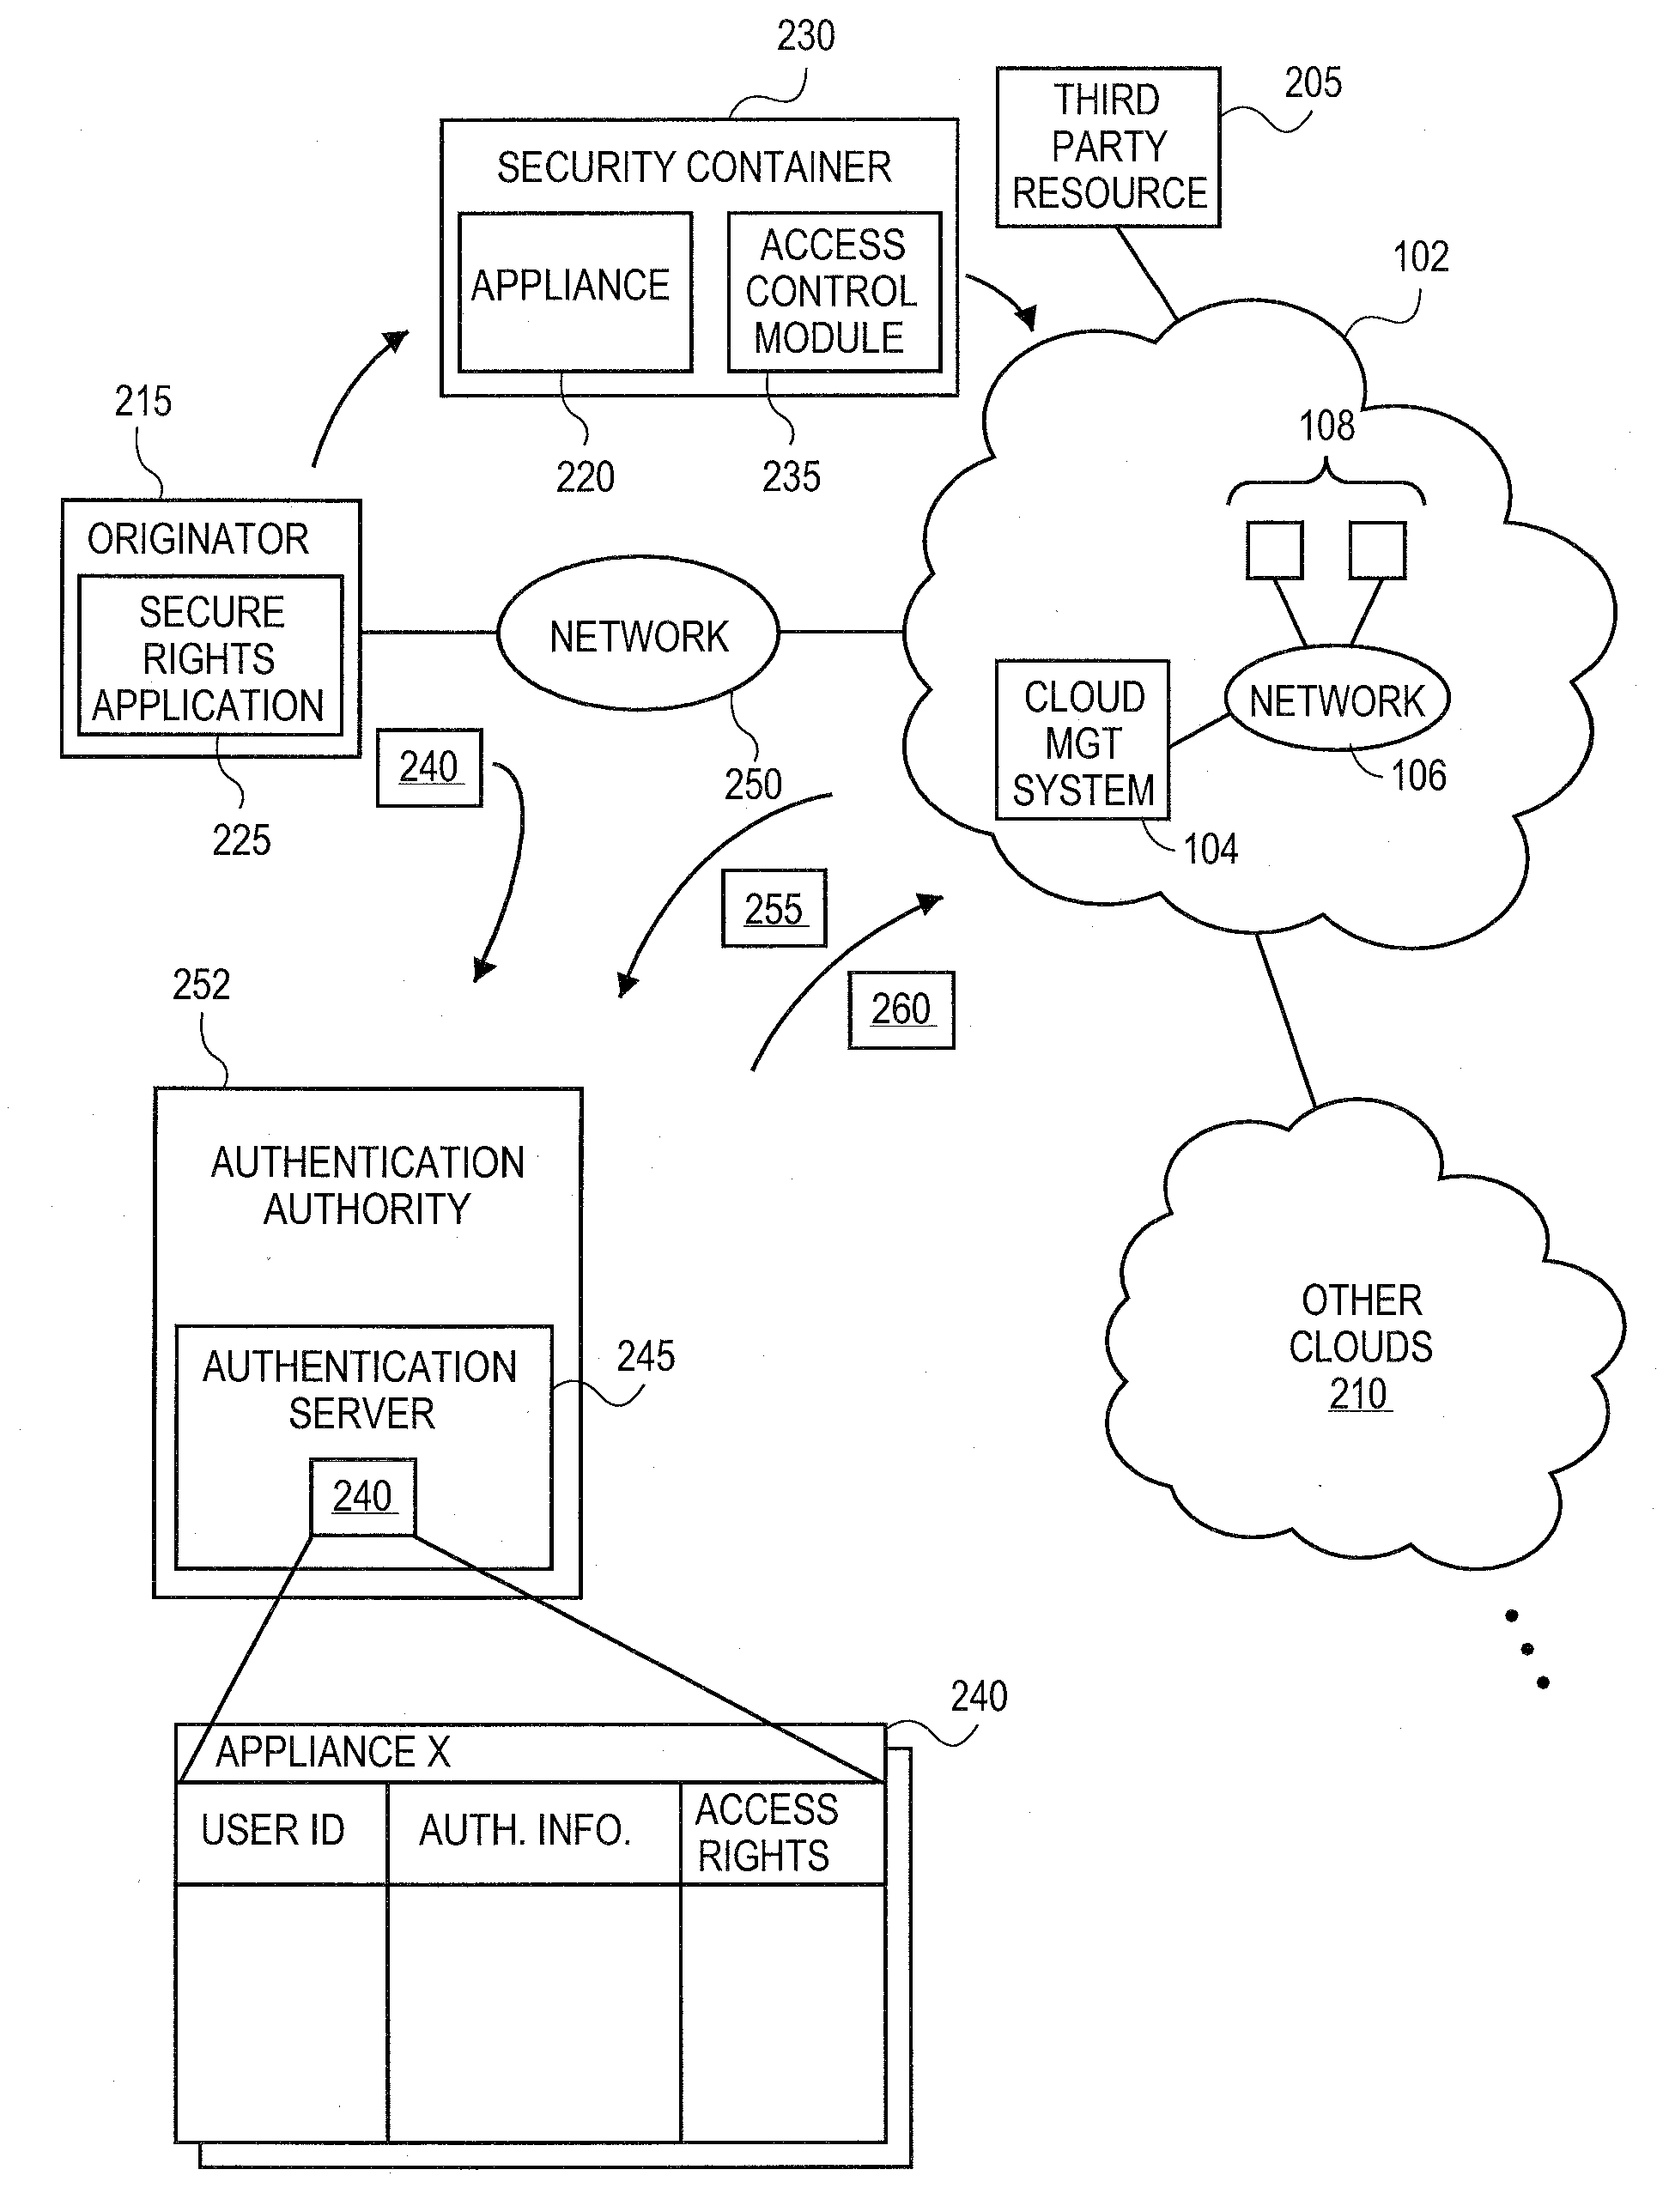 Methods and systems for securing appliances for use in a cloud computing environment